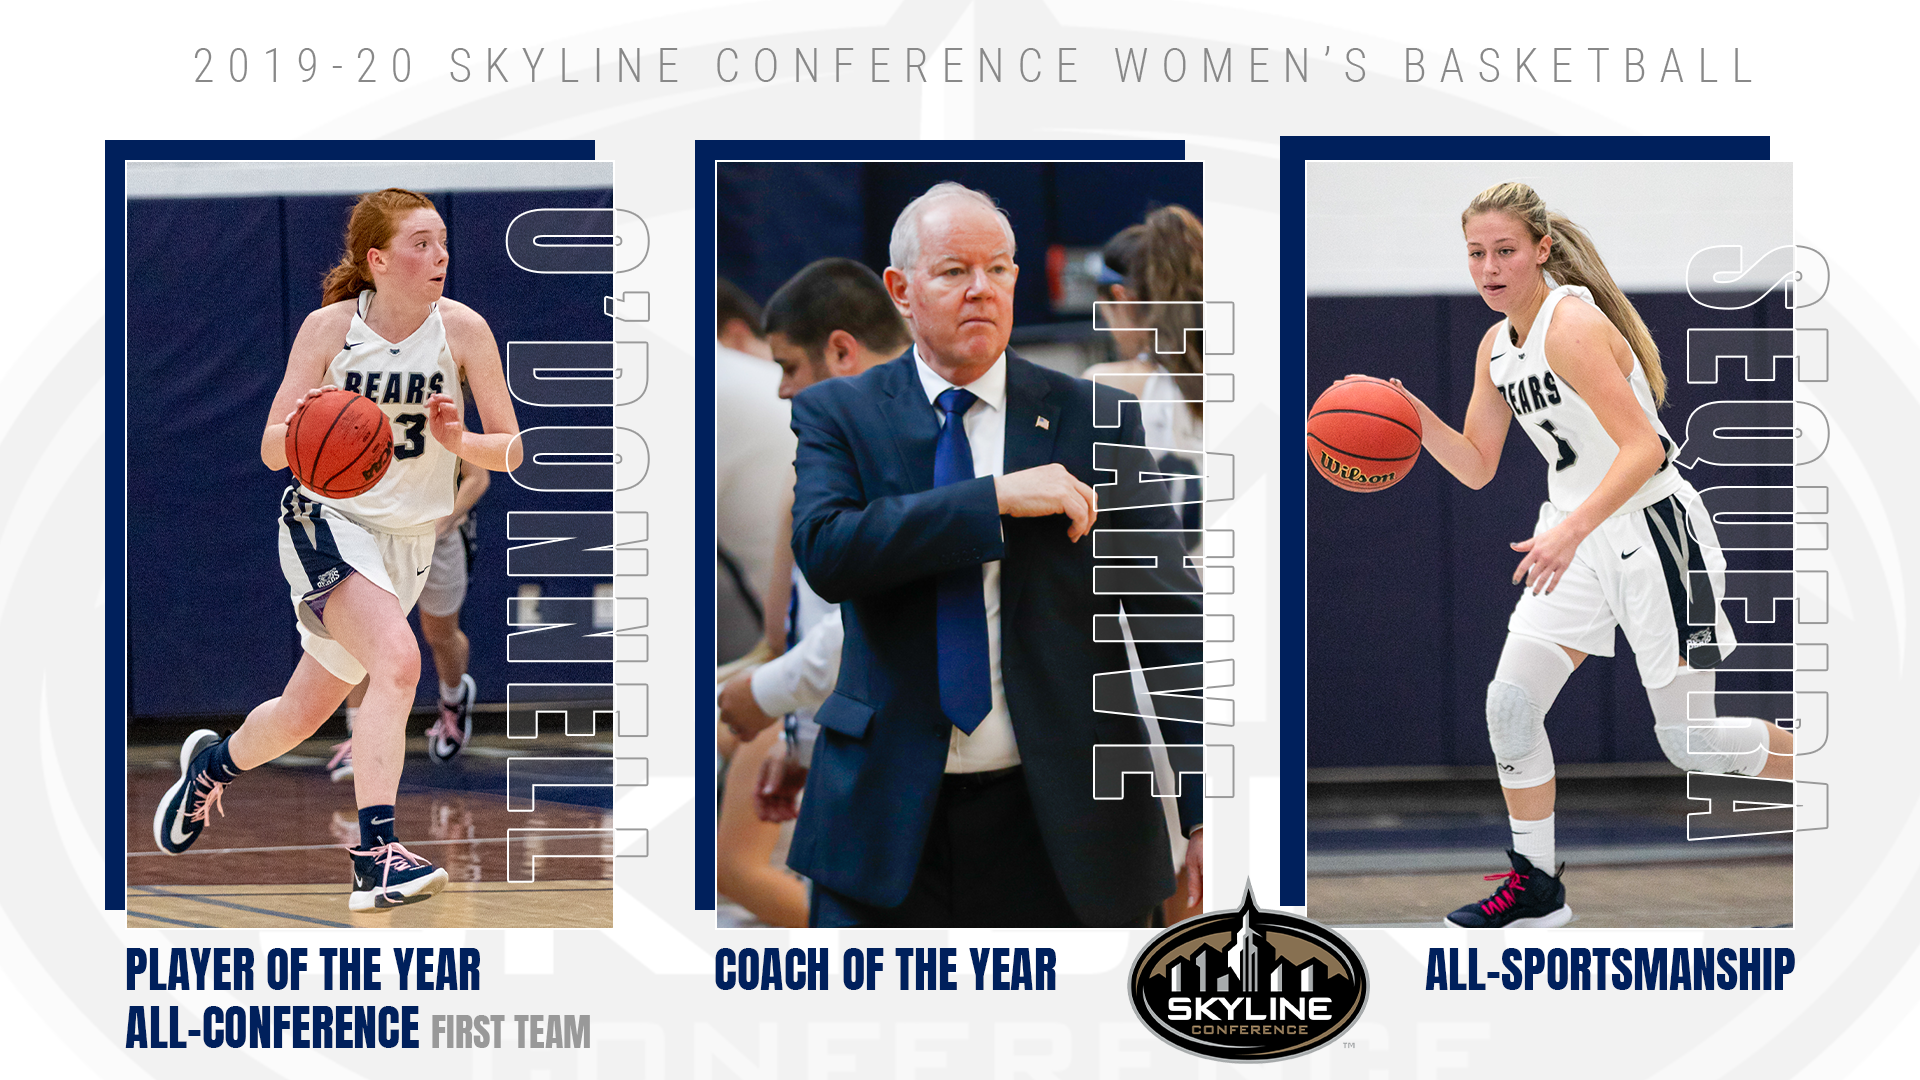 O’Donnell Headlines All-Skyline Women’s Basketball Team as Player of the Year; Flahive Picked Coach of the Year; Sequeira Lands on All-Sportsmanship